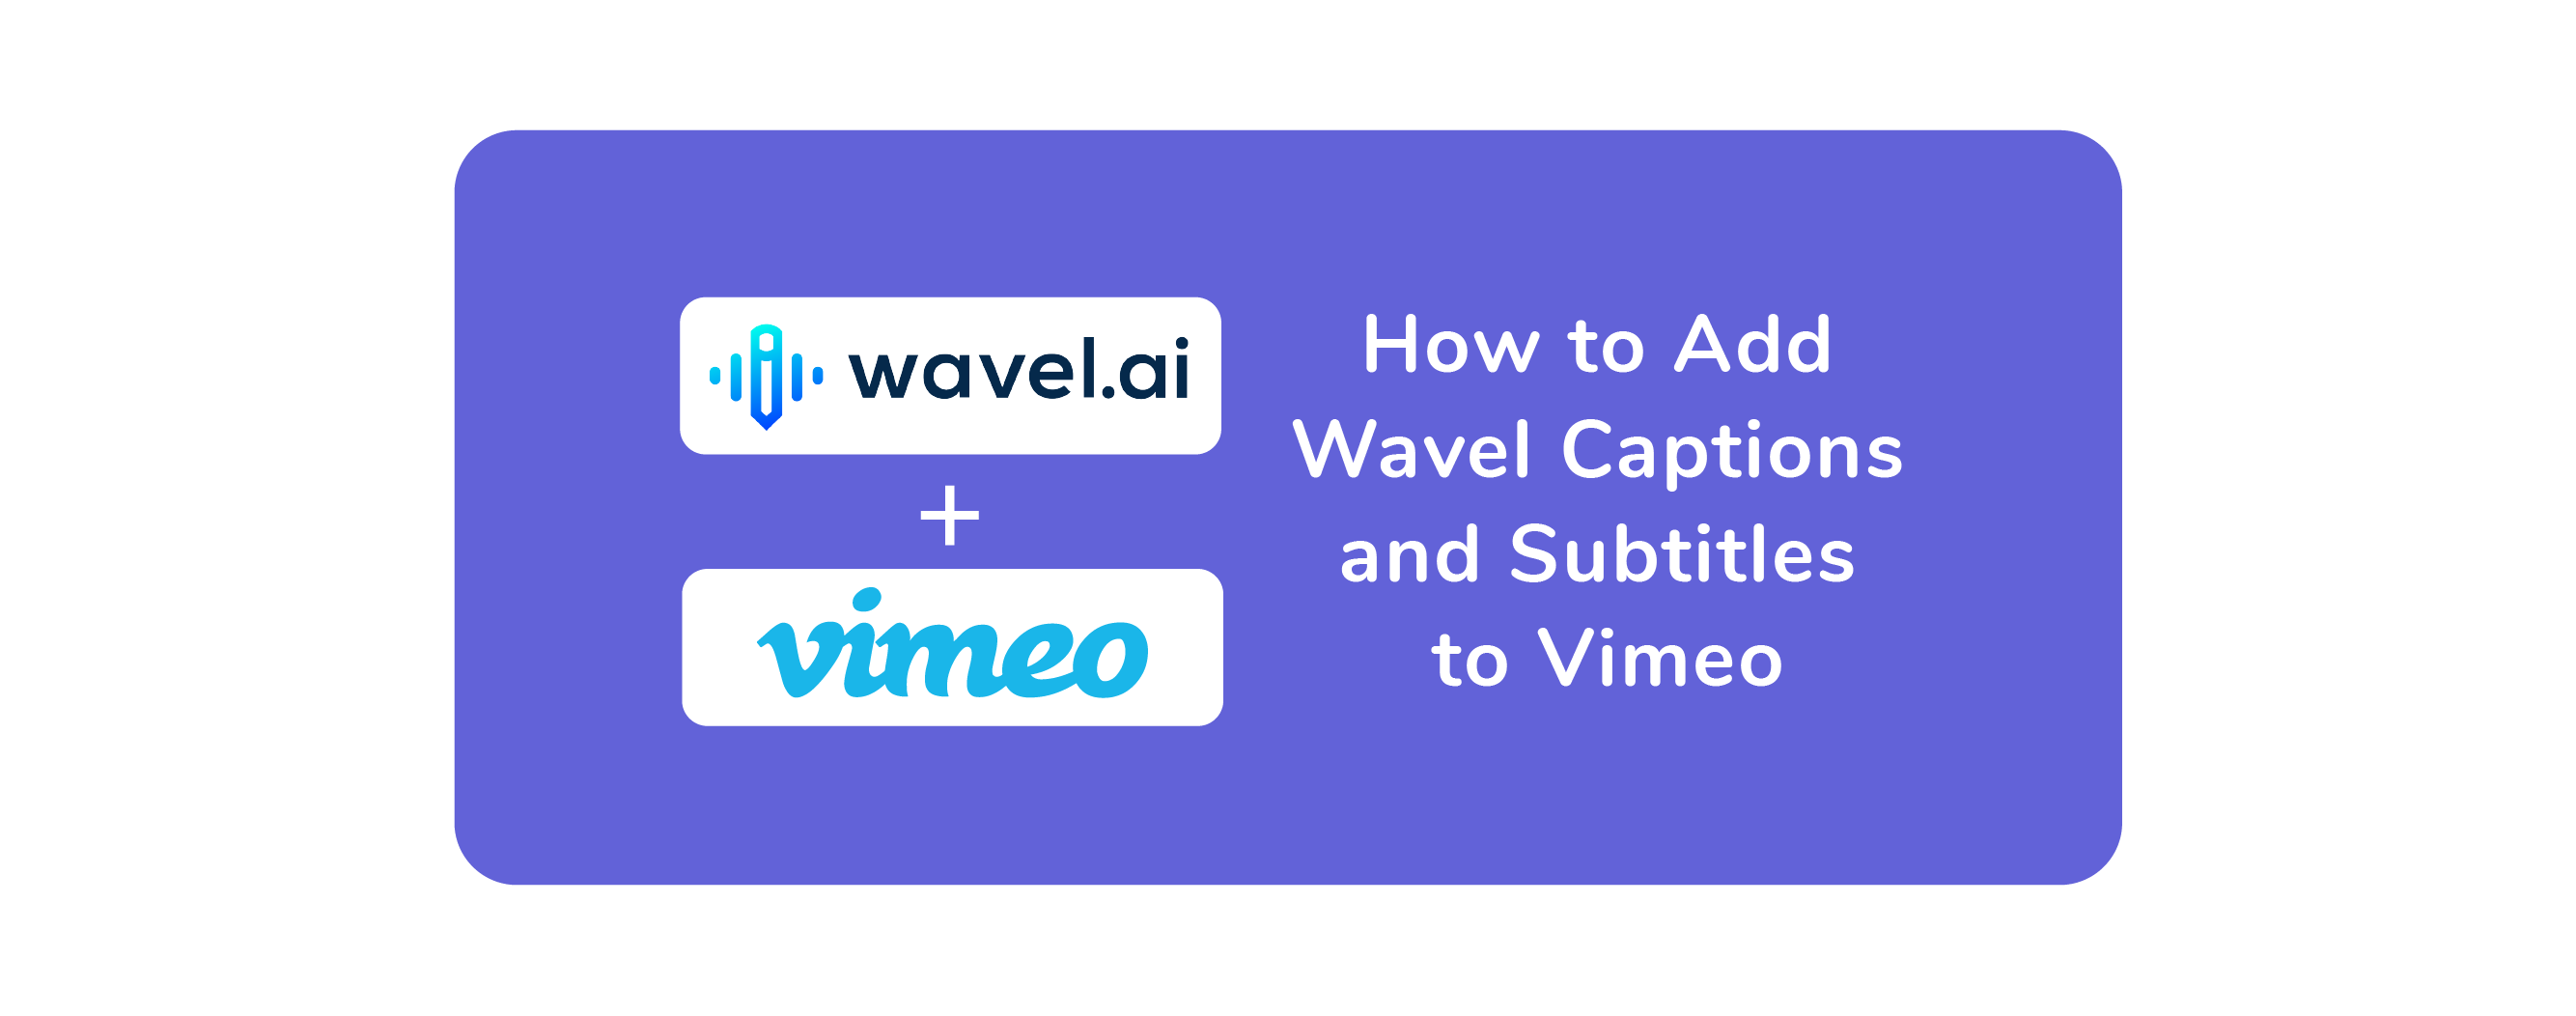 How To Add Subtitles And Captions To Vimeo